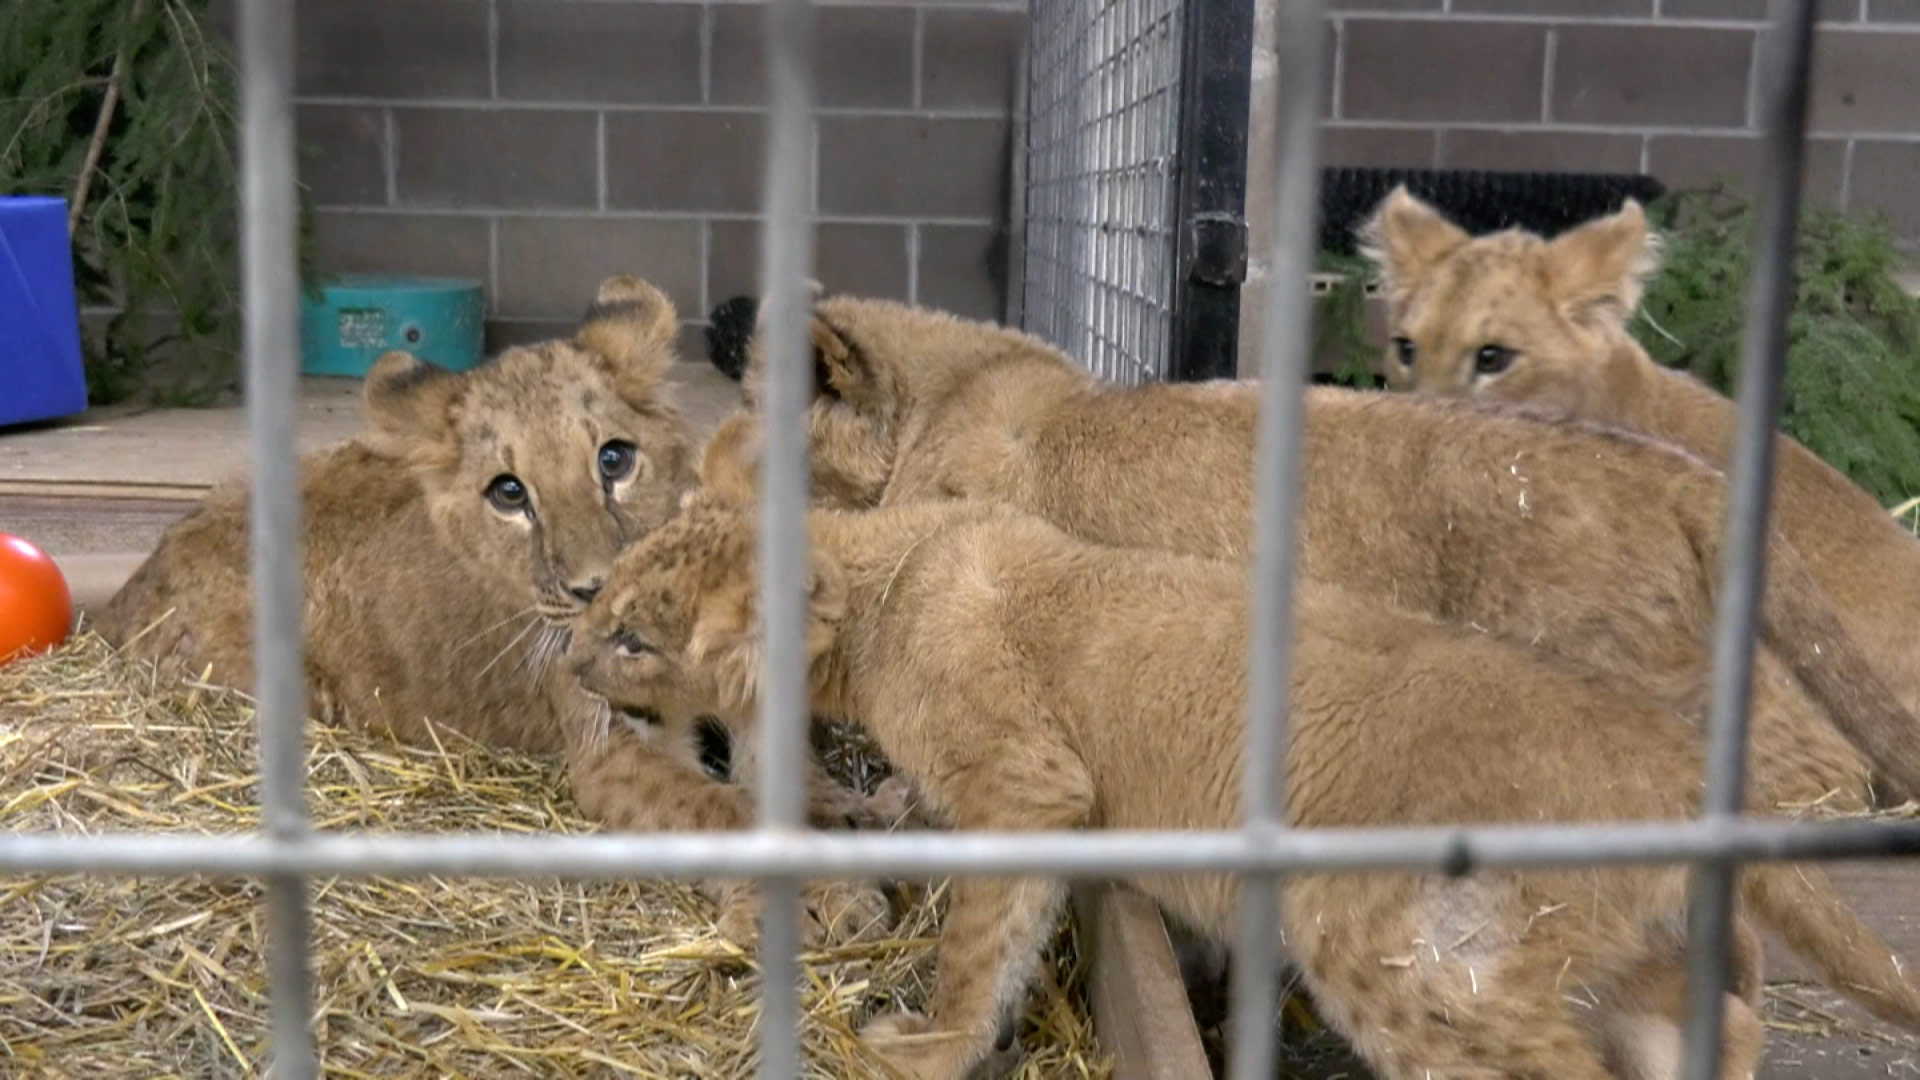 Four lion cubs were rescued from Ukraine and brought to a sanctuary in Minnesota. 